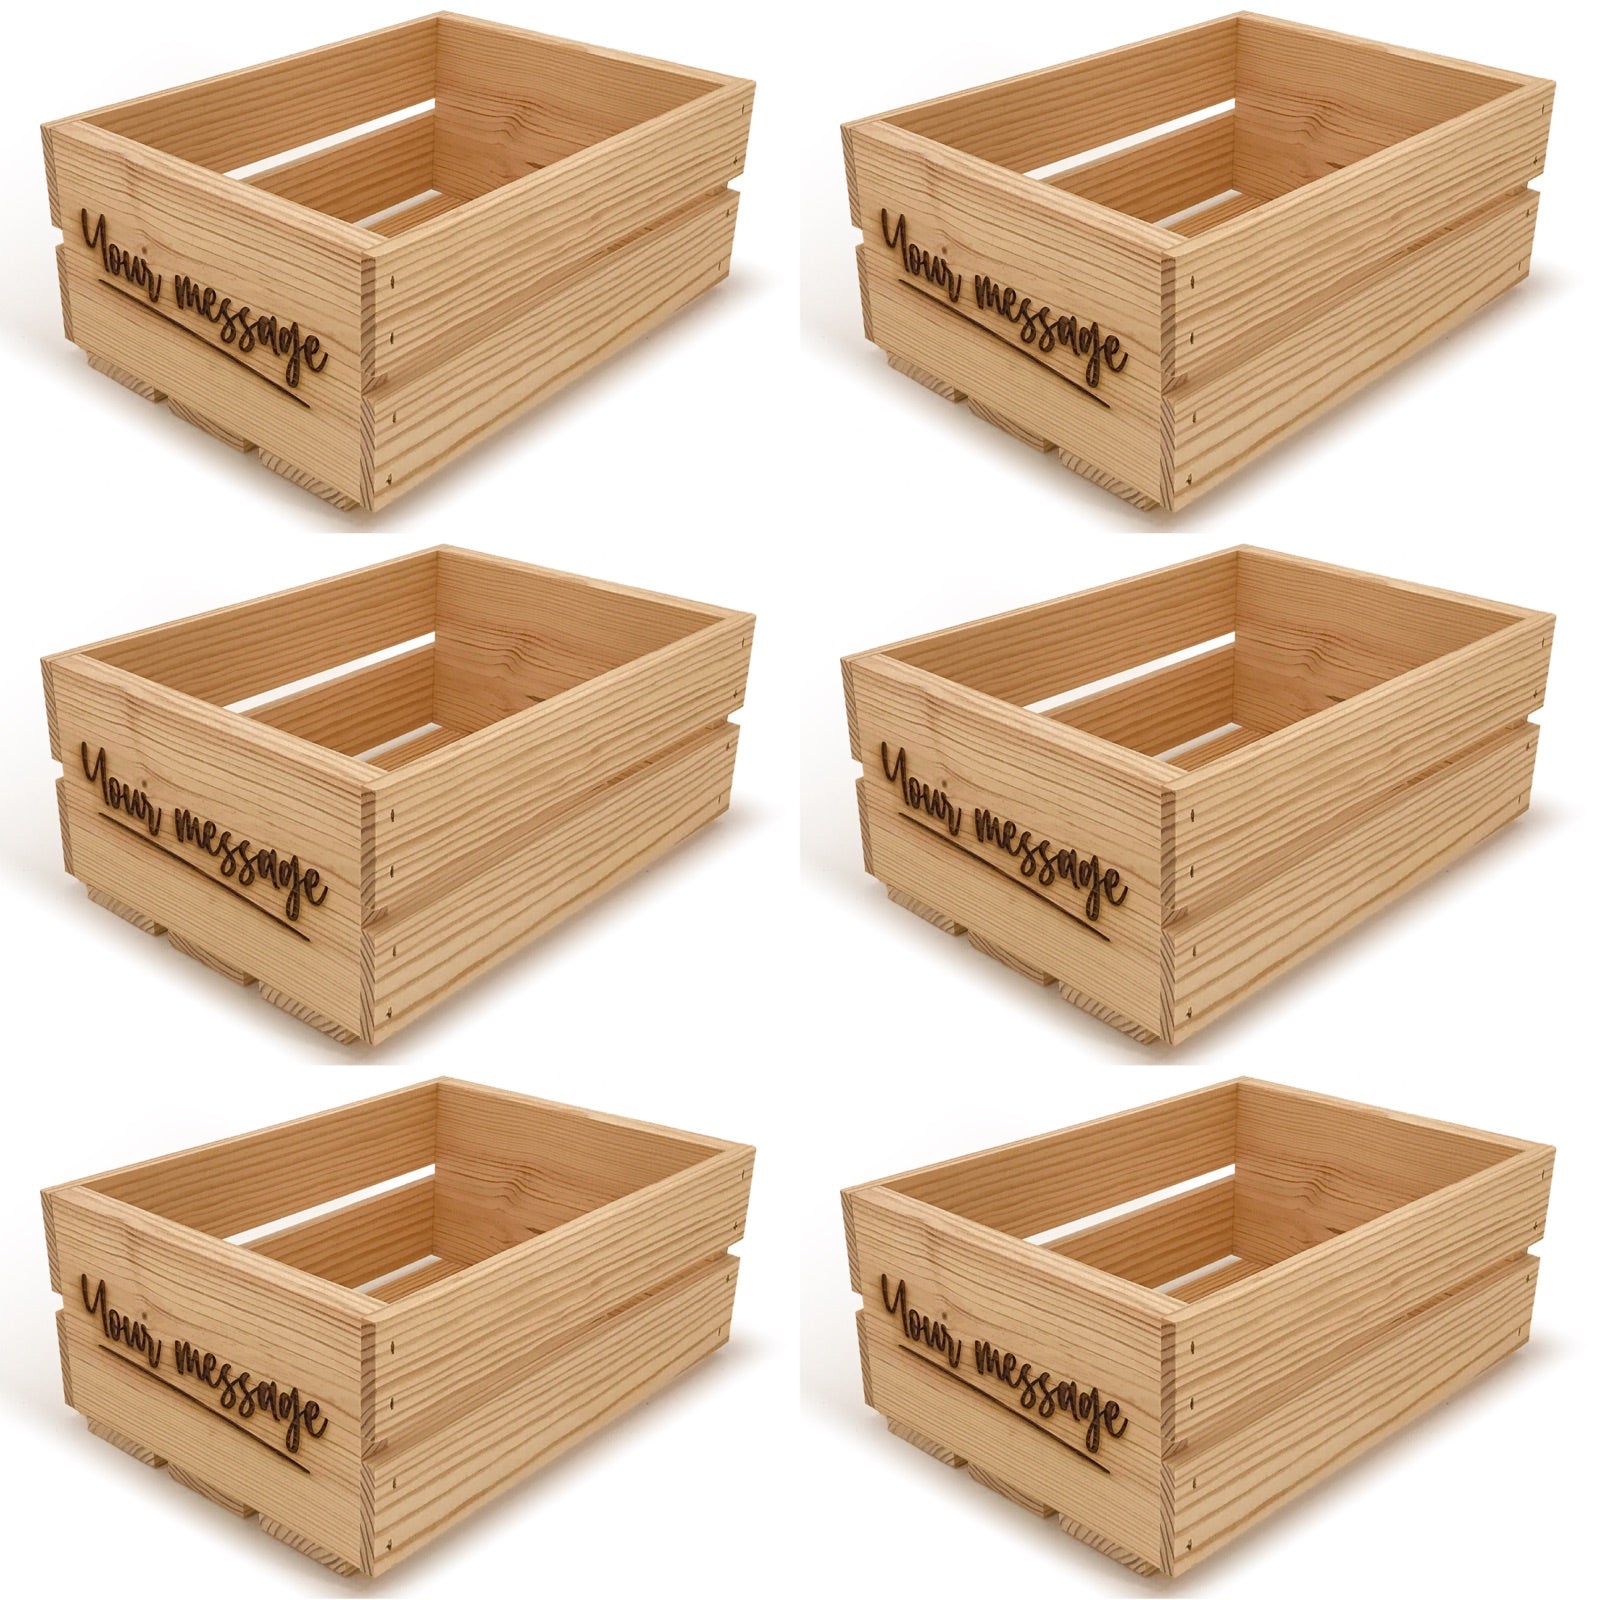 6 Small wooden crates with custom message 12x9x5.25